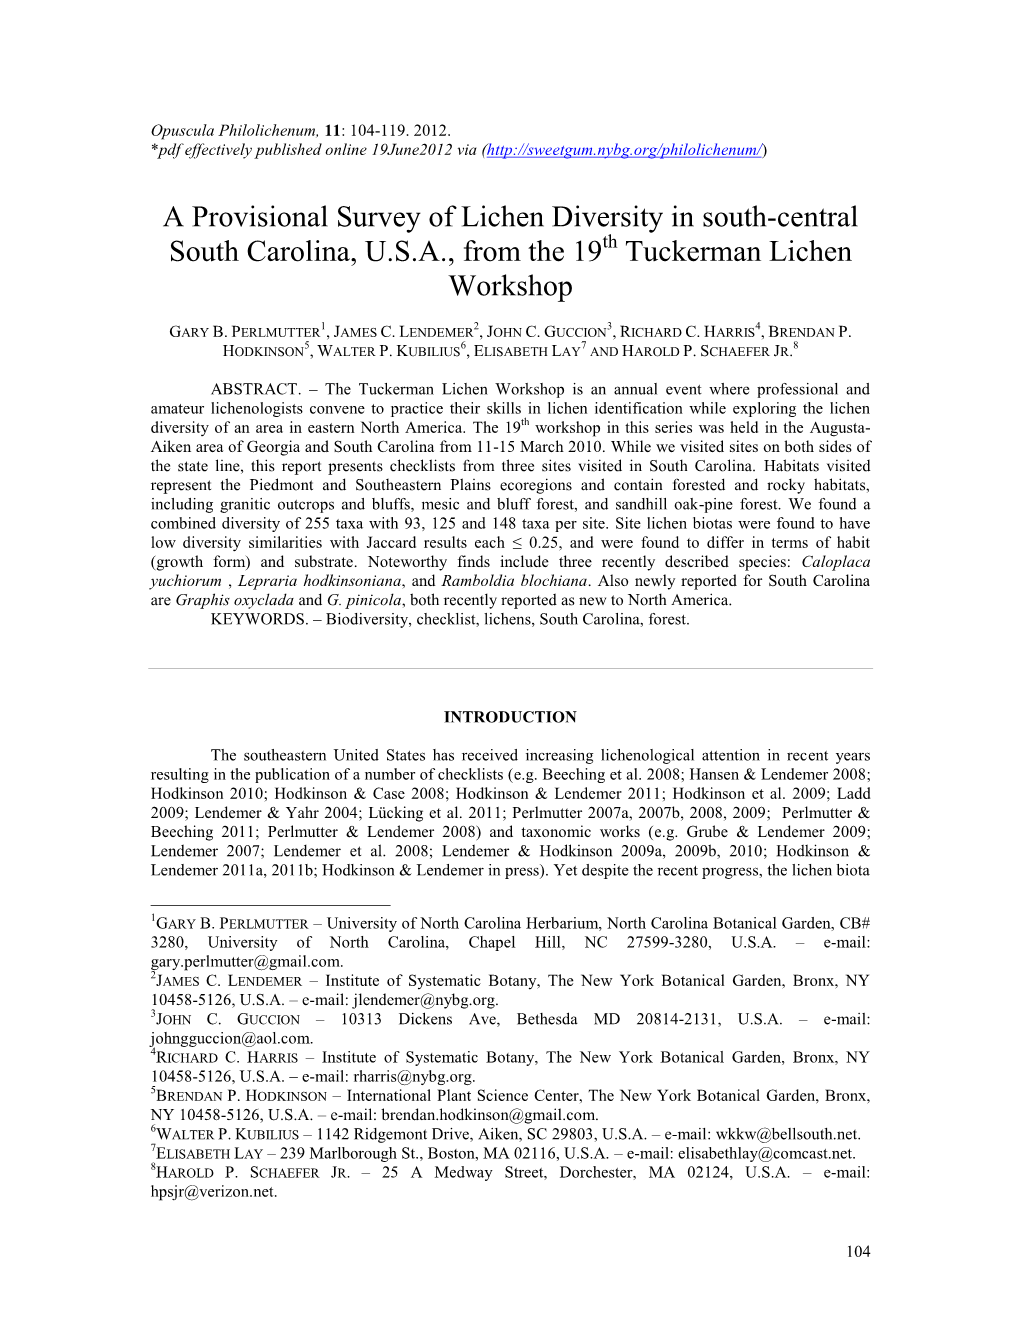 A Provisional Survey of Lichen Diversity in South-Central South Carolina, U.S.A., from the 19Th Tuckerman Lichen Workshop